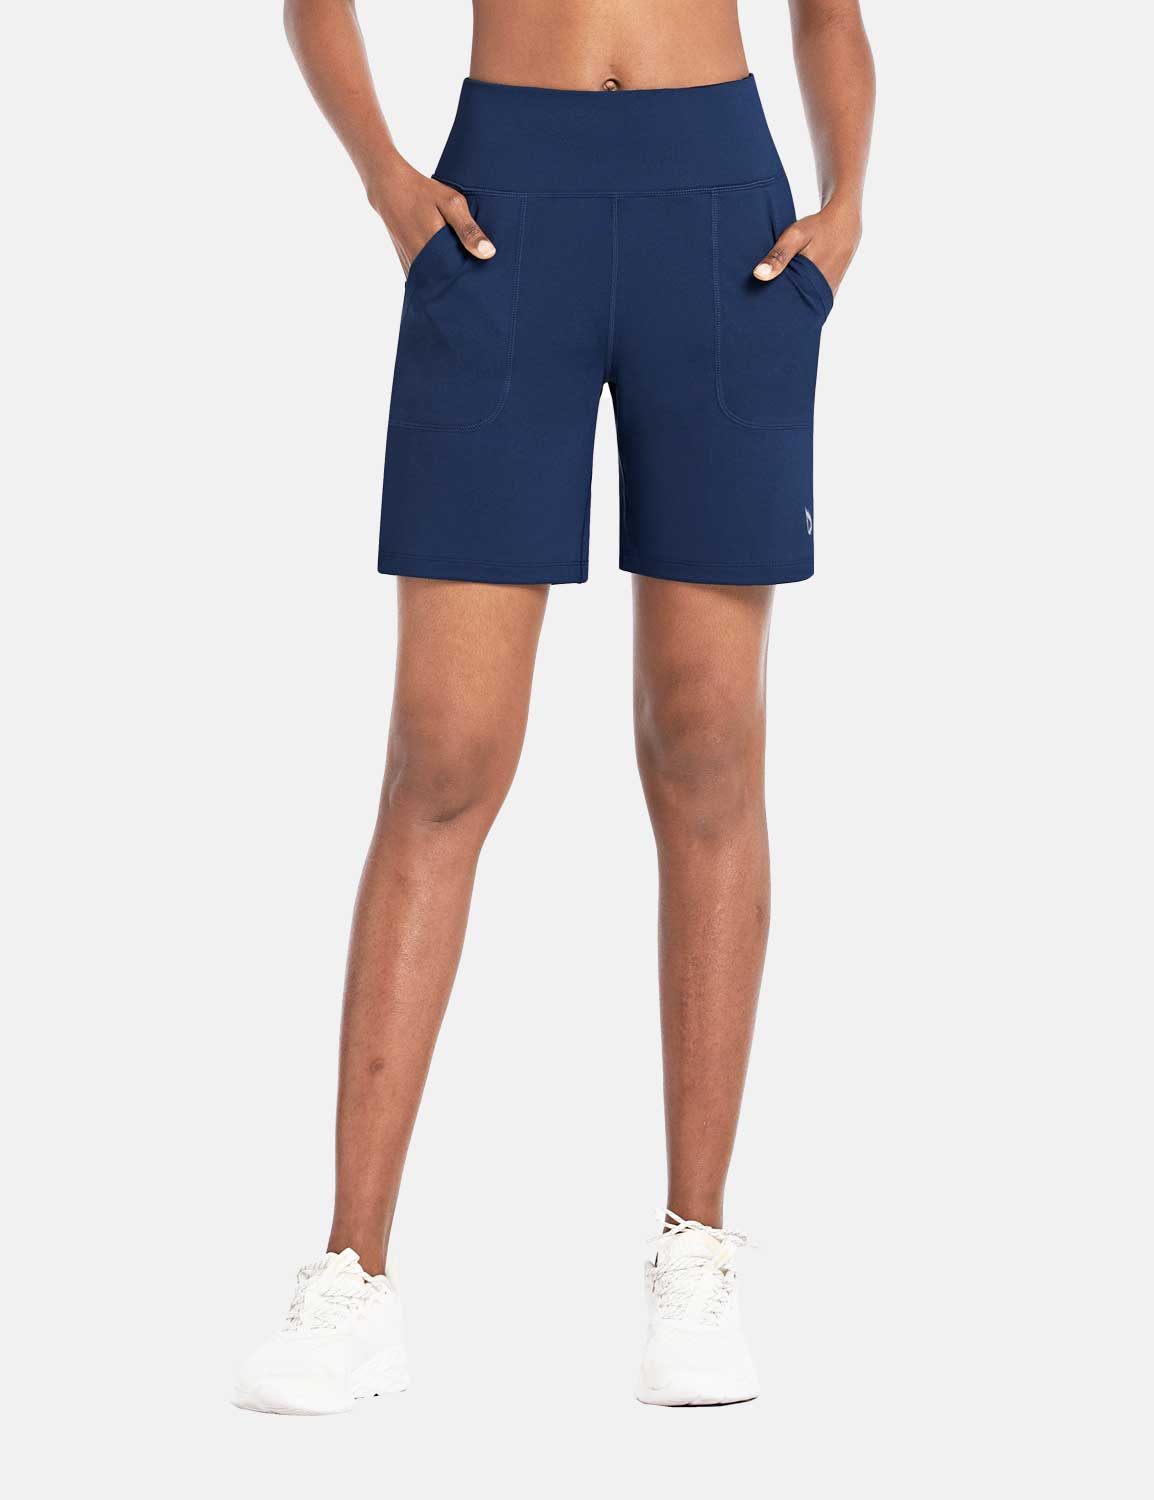 Baleaf Women's High Rise Athletic Relaxed Fit Pocketed Shorts Estate Blue Main